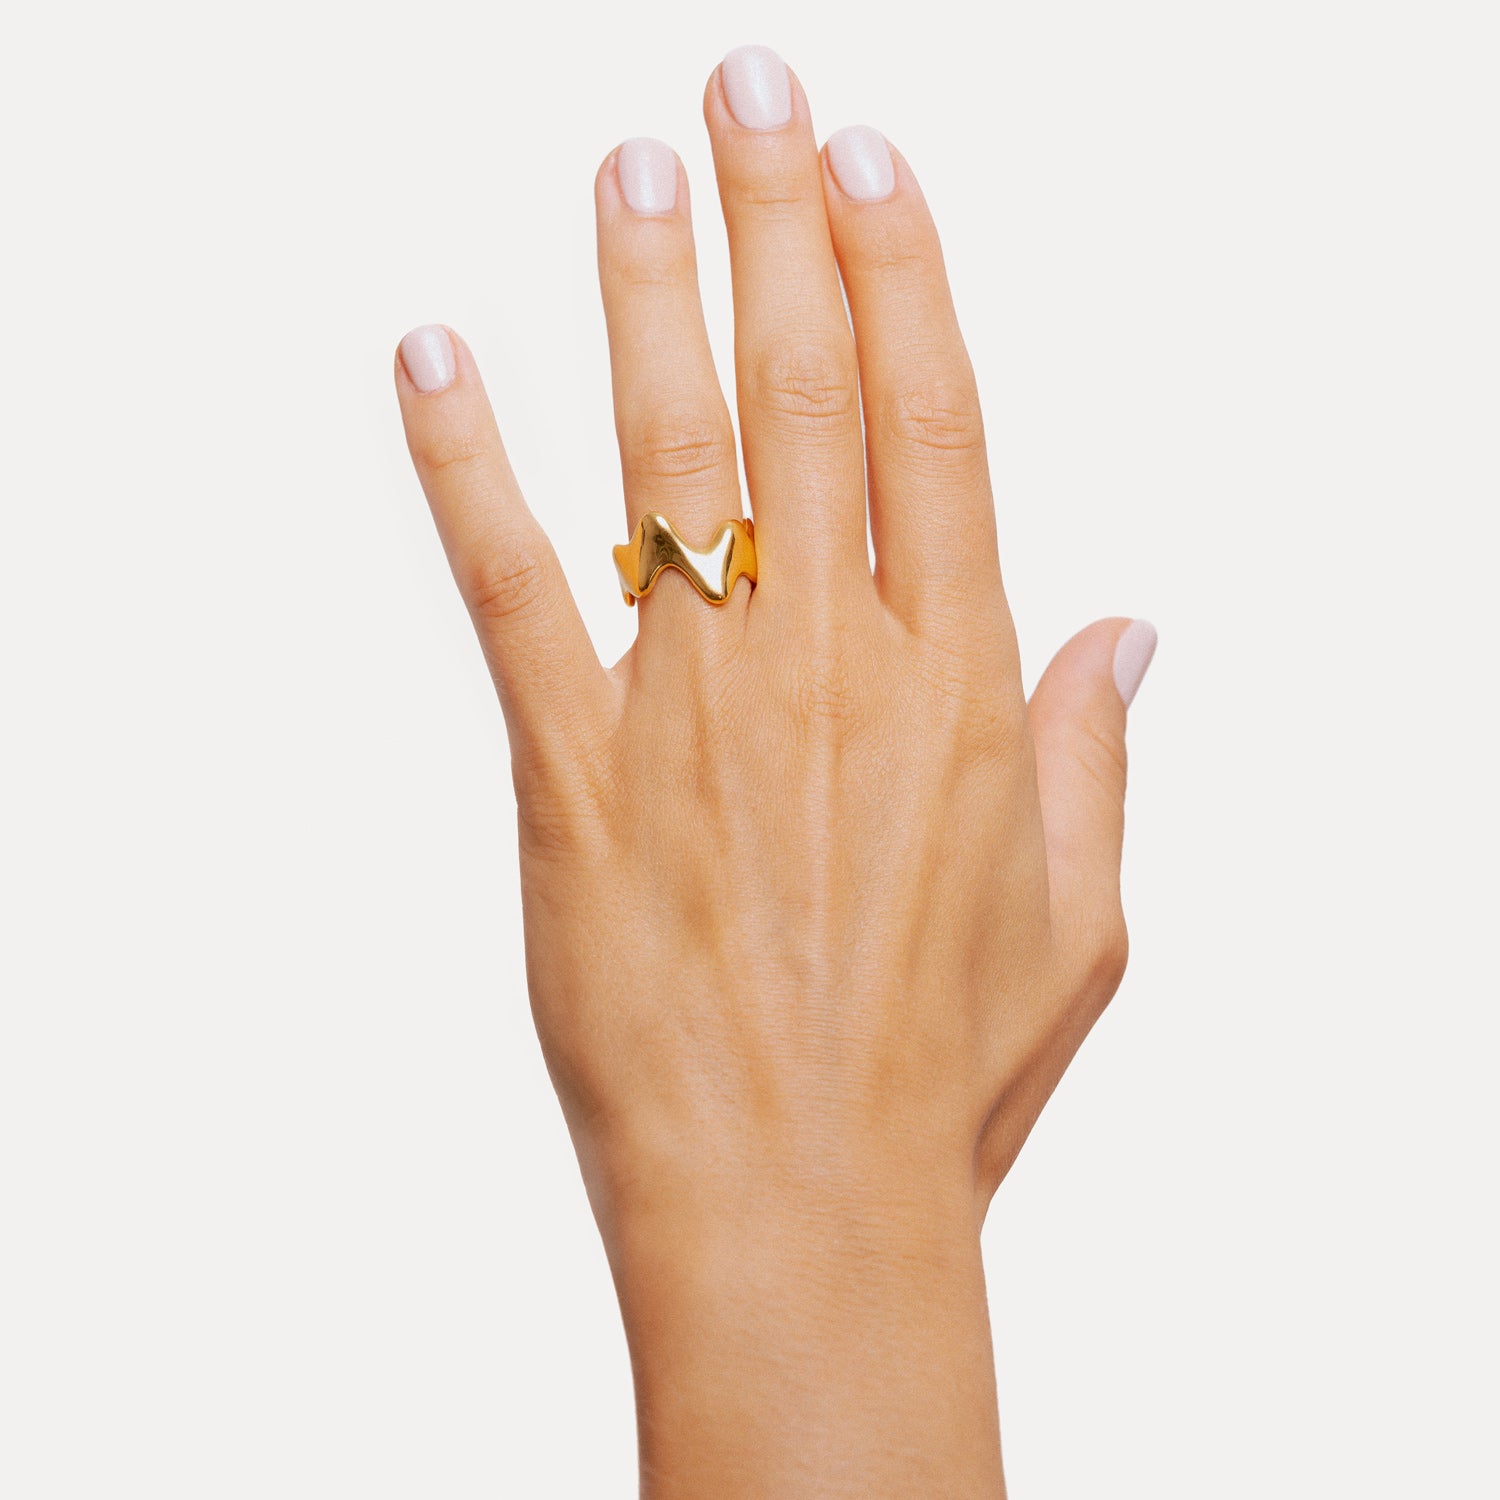 Poise Bold Wide Ring in 18k Gold Vermeil shown on a hand.